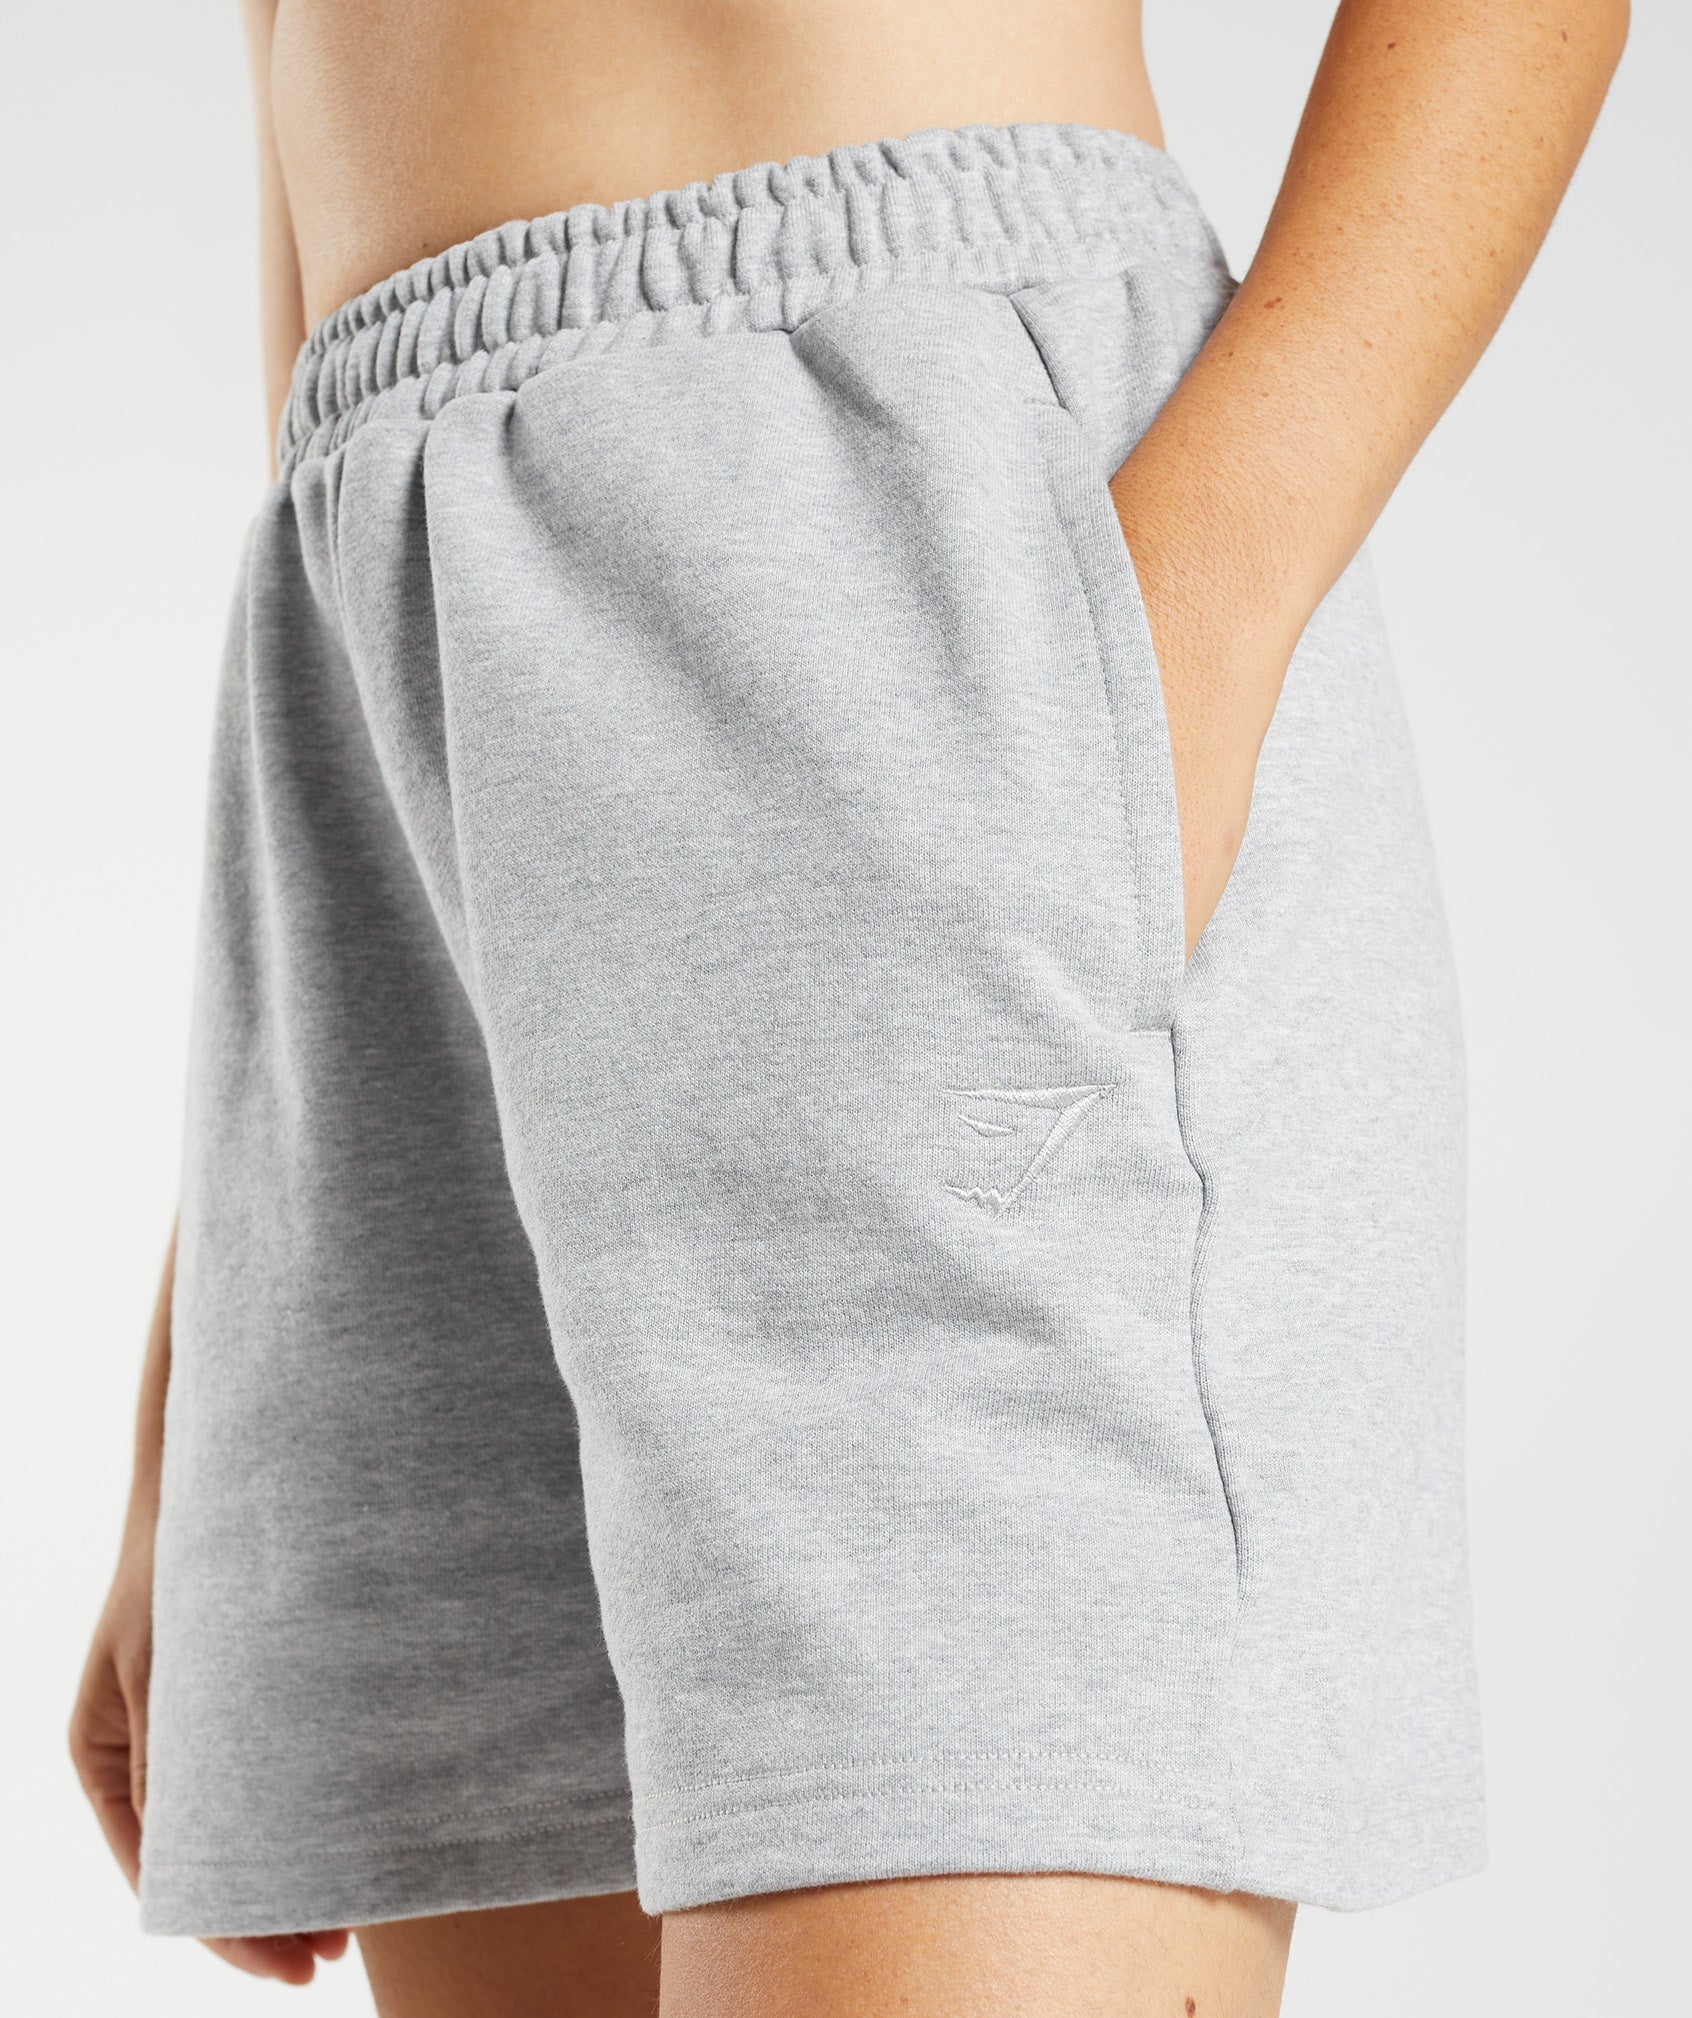 Rest Day Sweats Shorts in Light Grey Core Marl